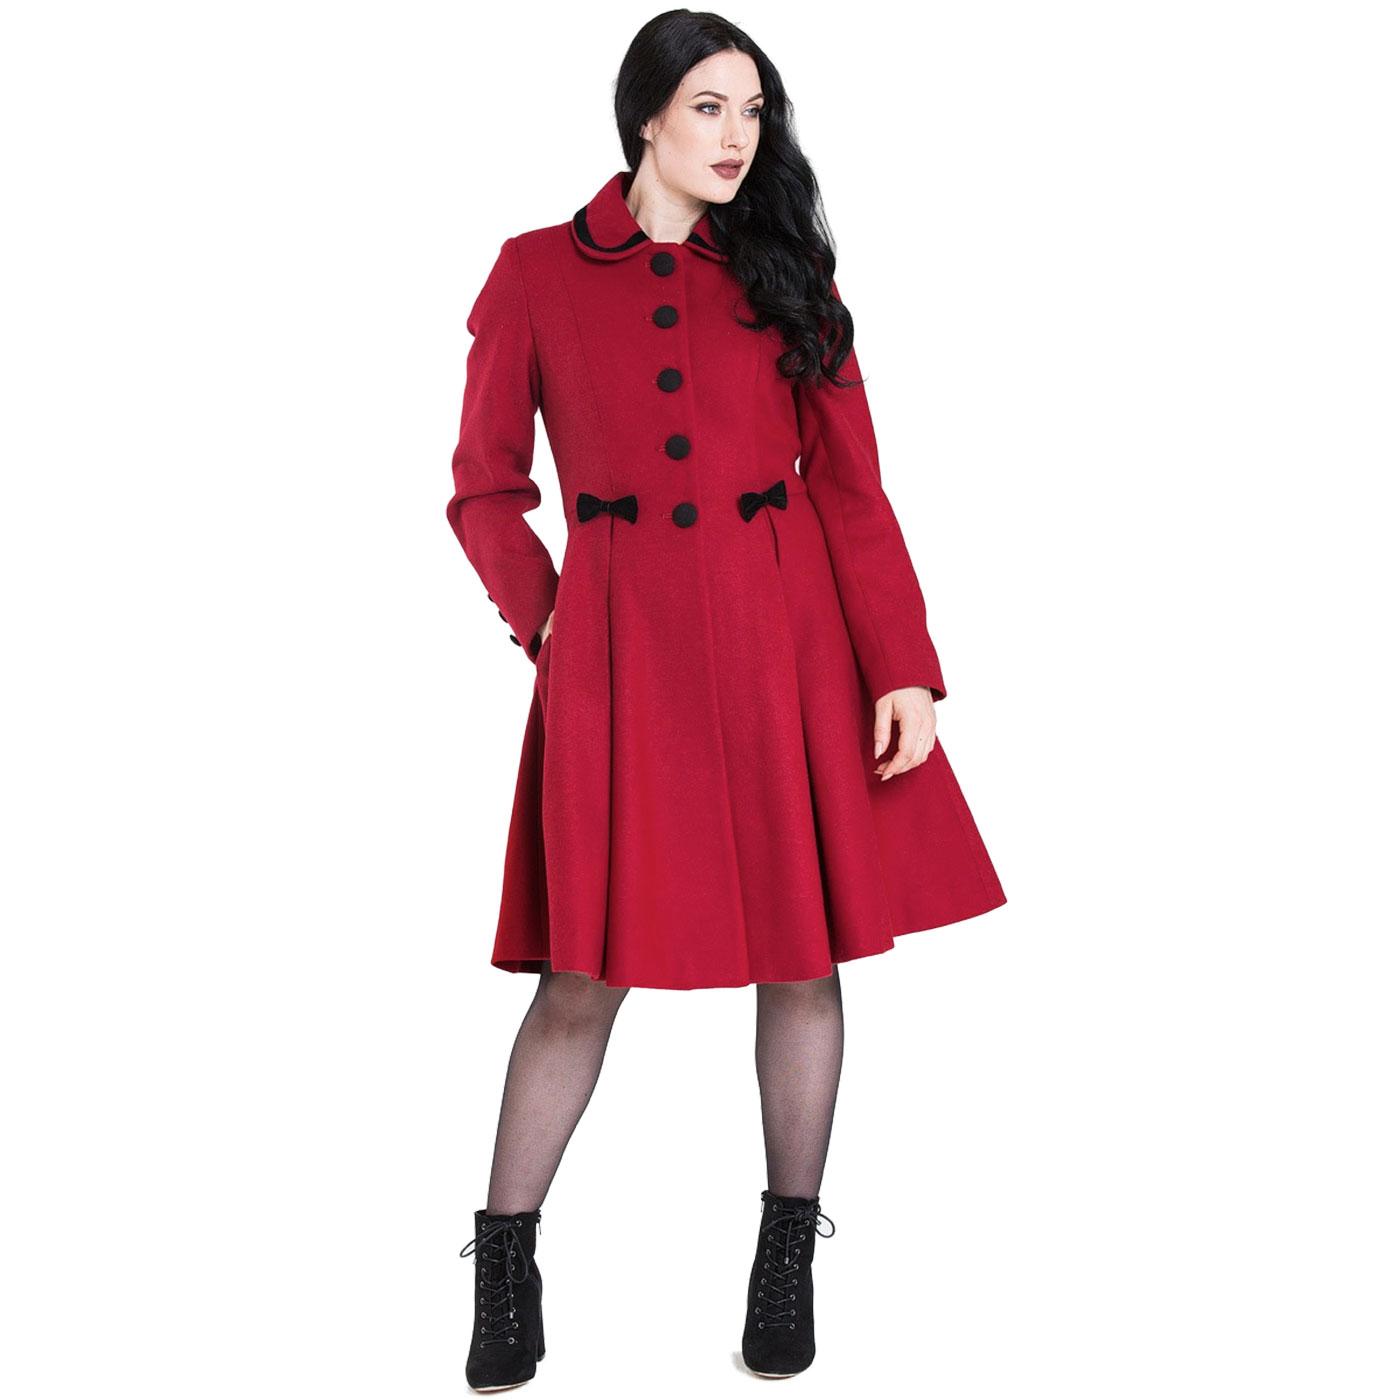 HELL BUNNY Olivia Womens Vintage 1950s Bow Coat Red